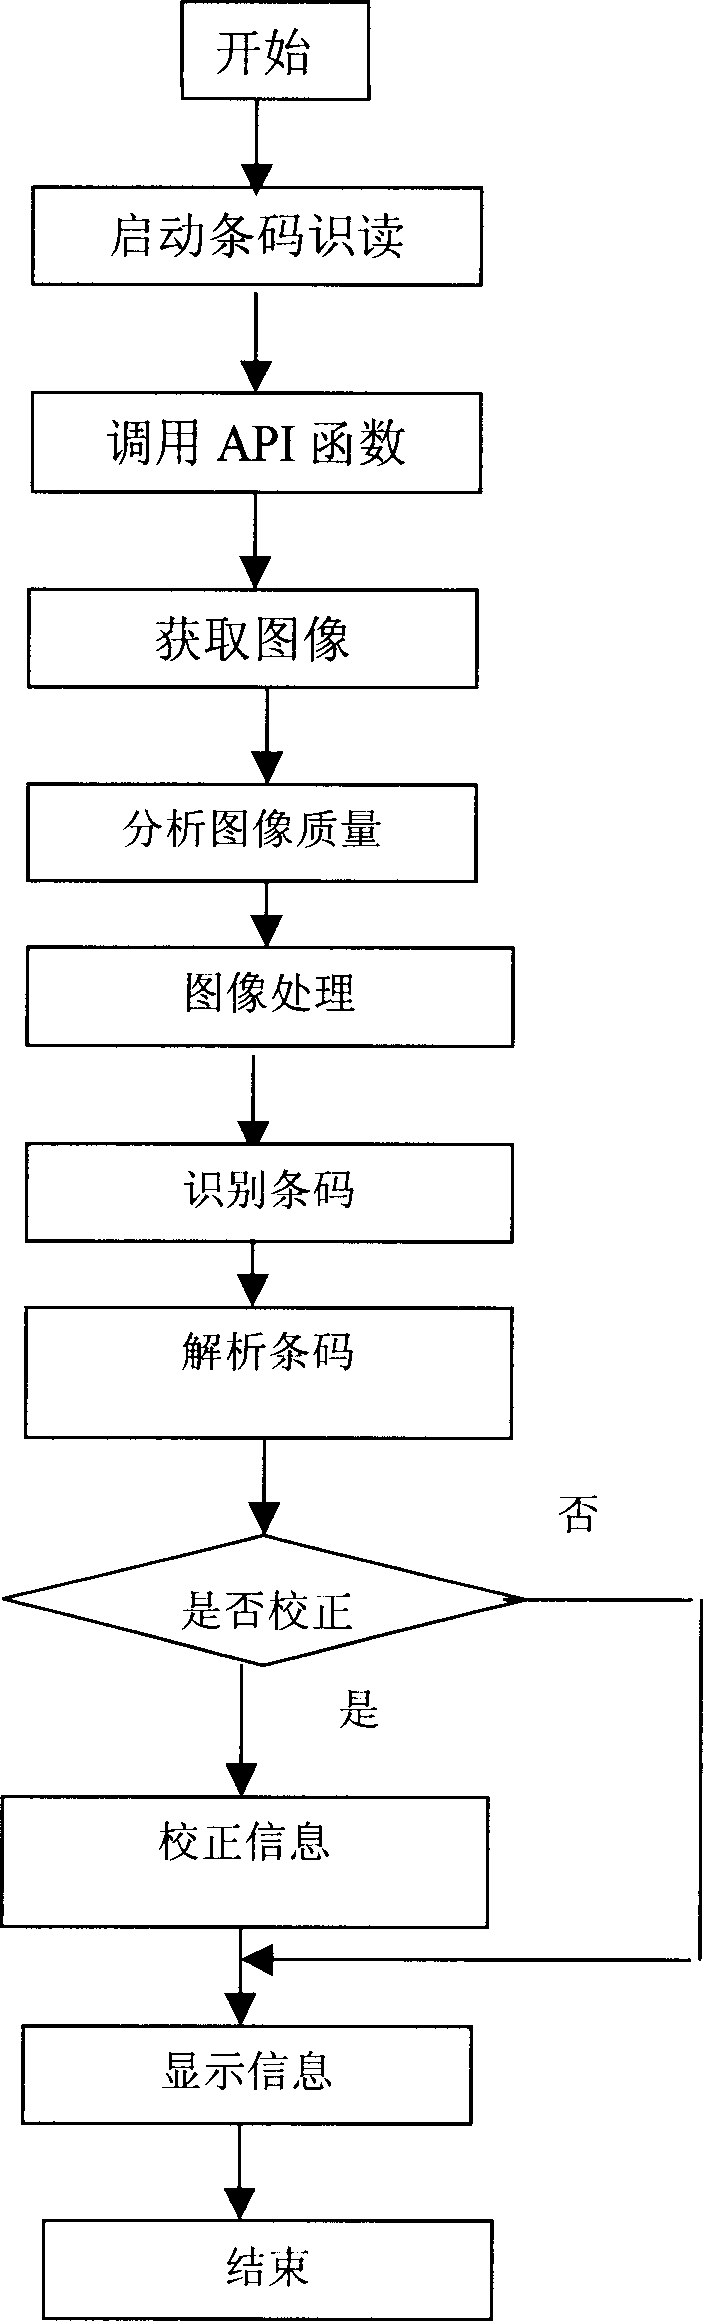 System and method for managing traffic information